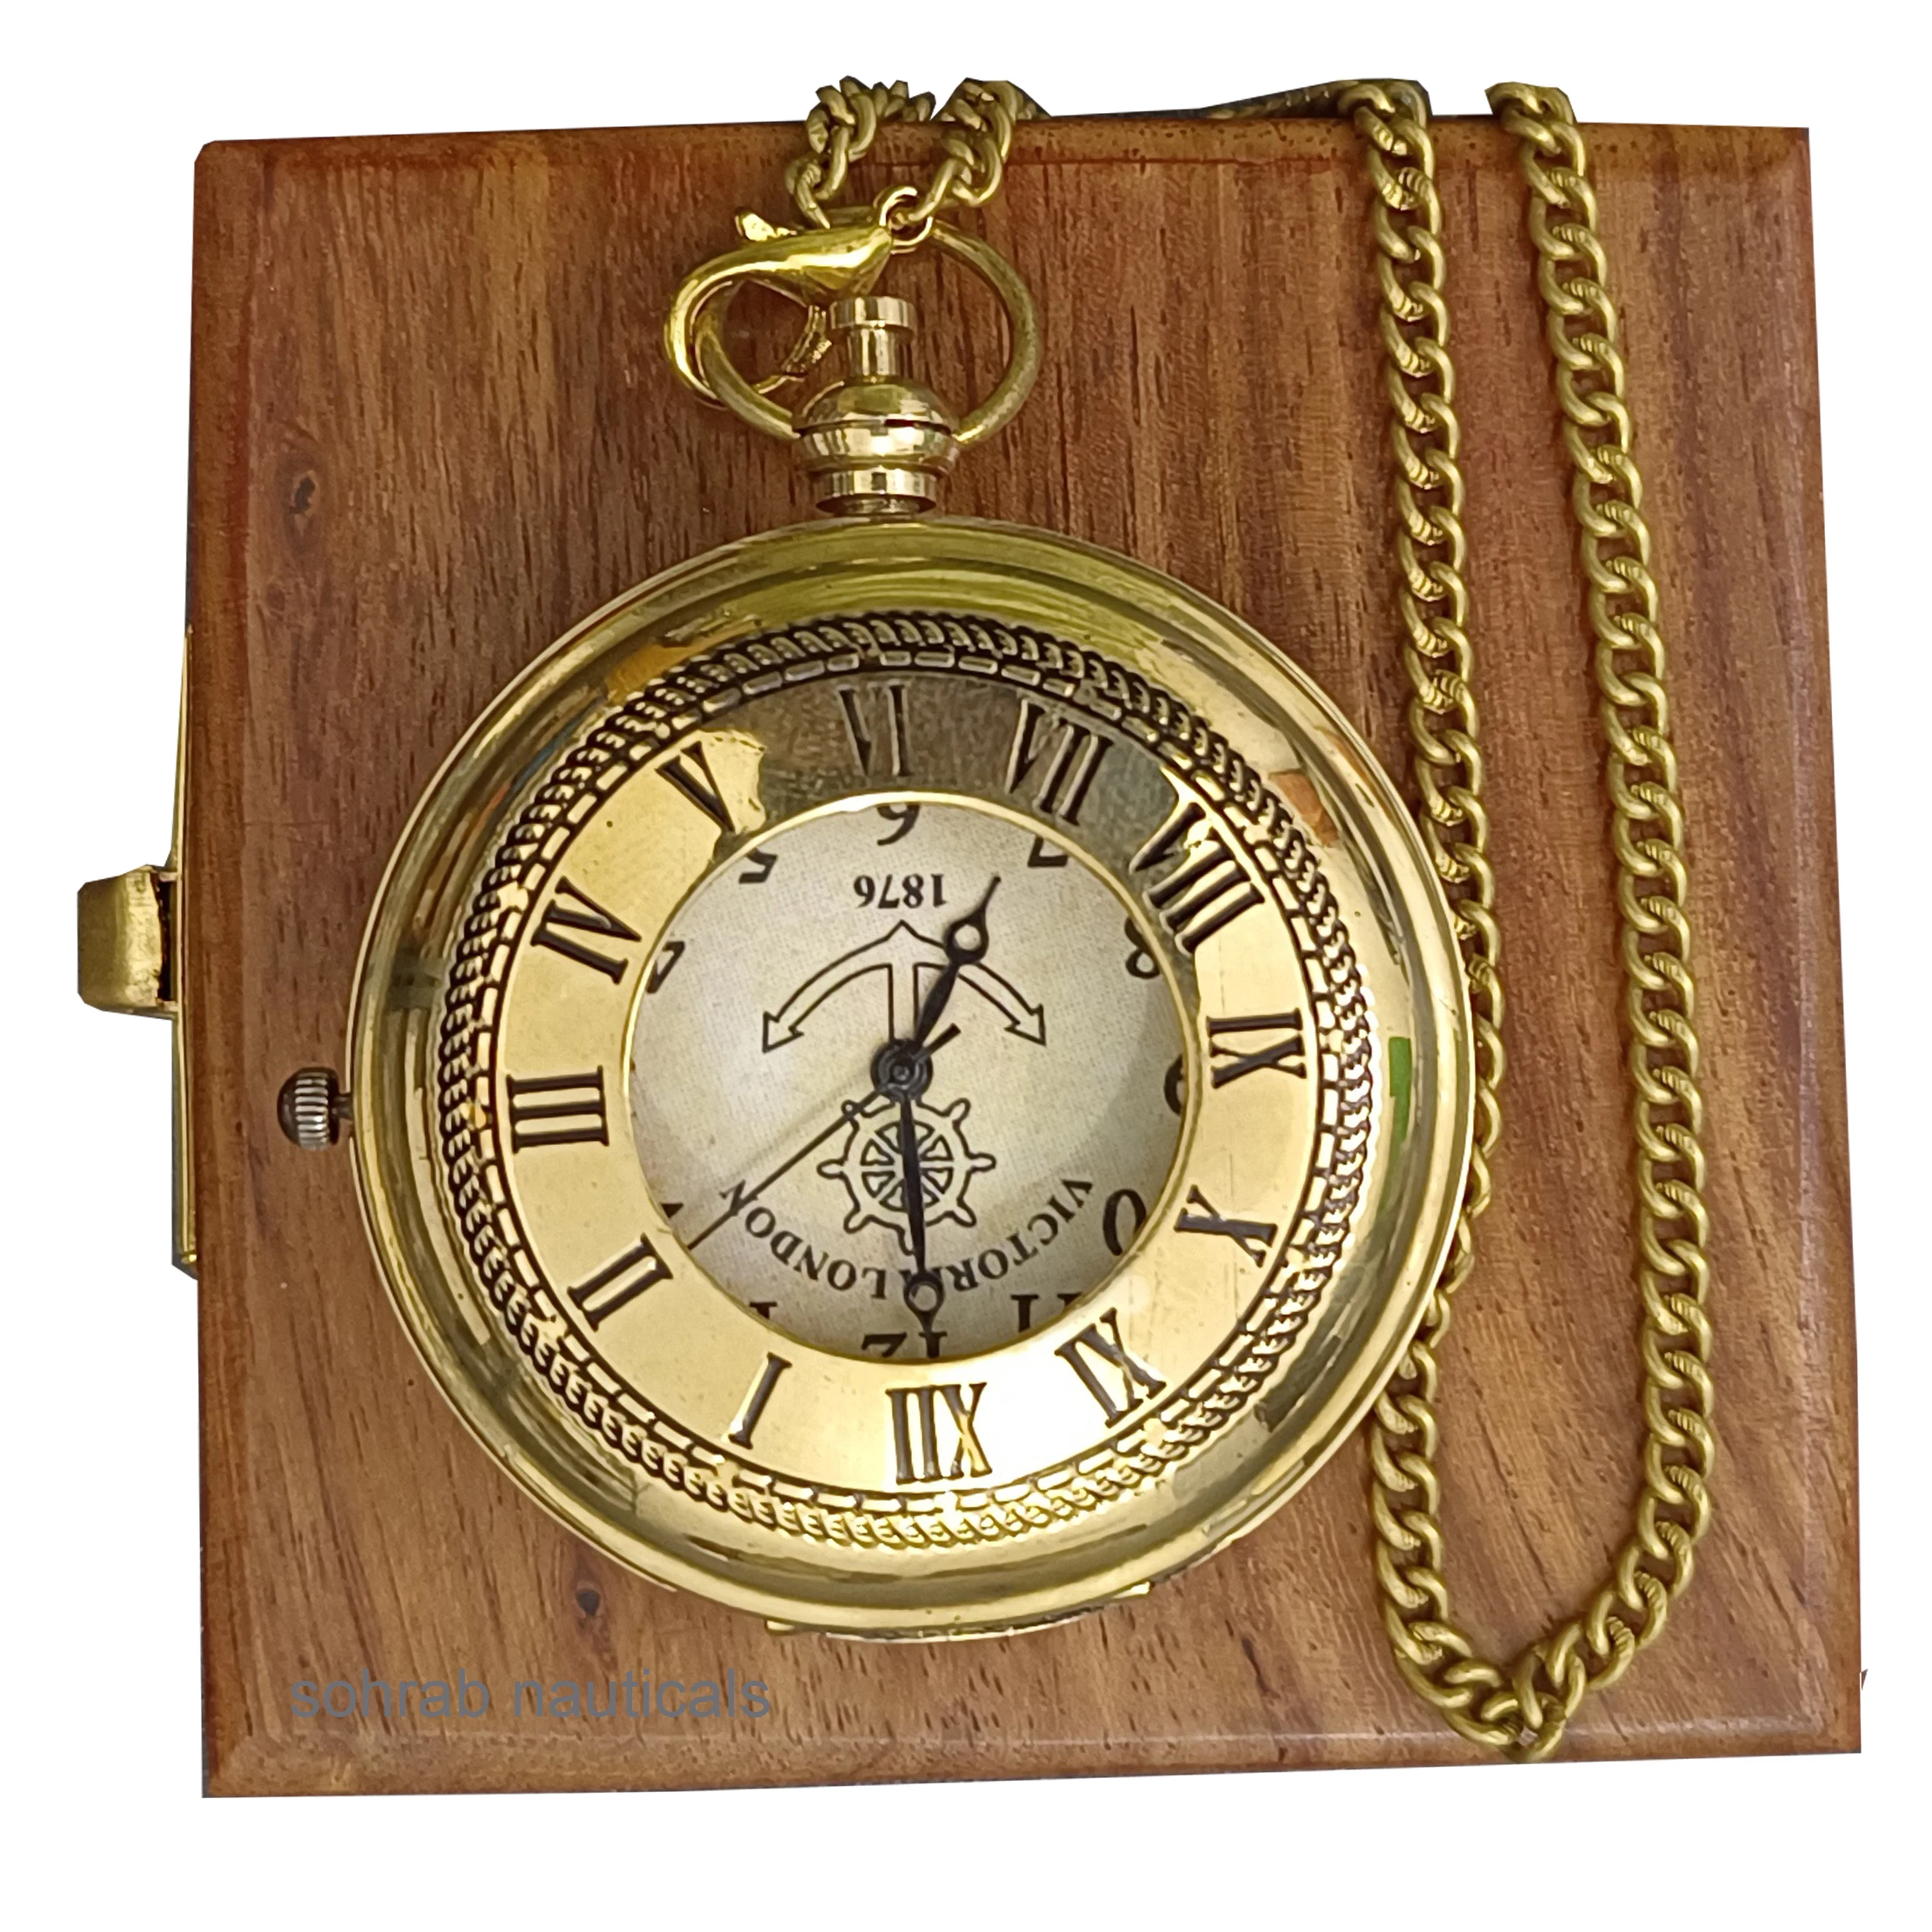 Best Brass Pocket Watch Key Ring Maritime Working Vintage Look Handmade With Push Button Wooden Box Selling For Exports